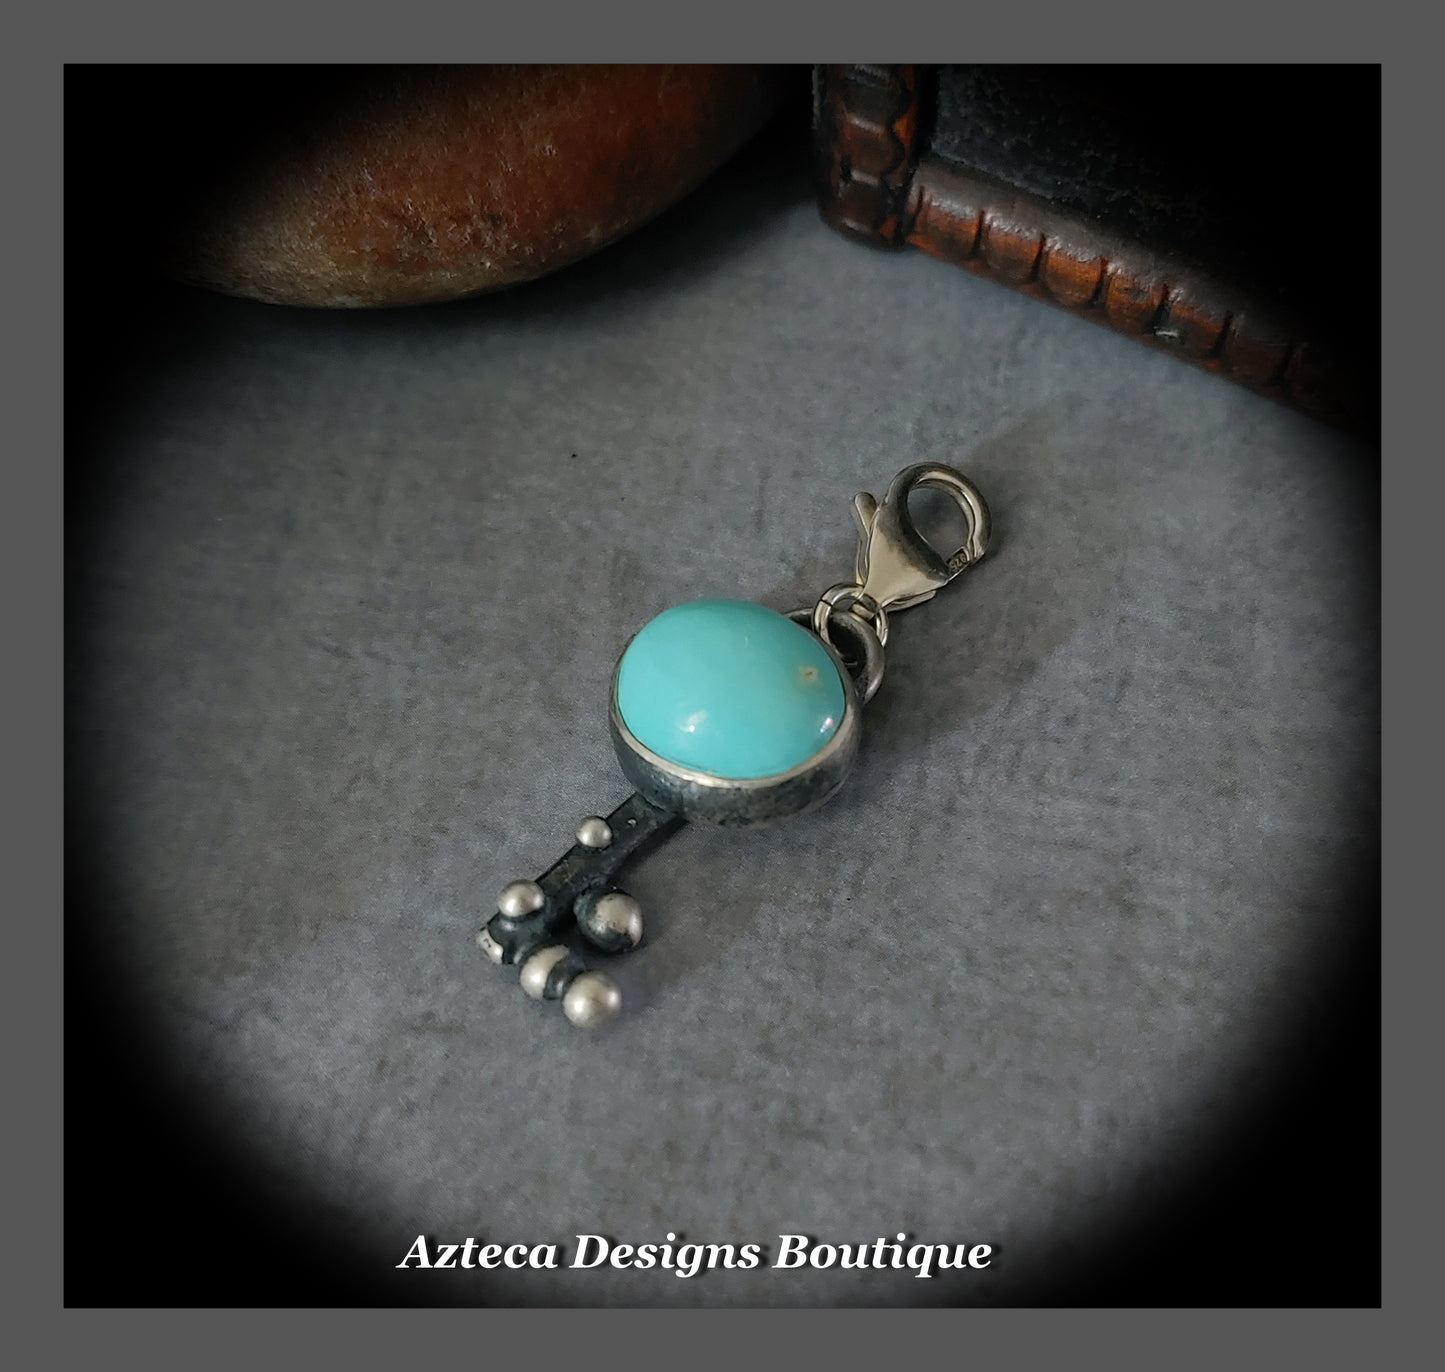 Lone Mountain Turquoise + Sterling Silver + Clip On Charm Pendant